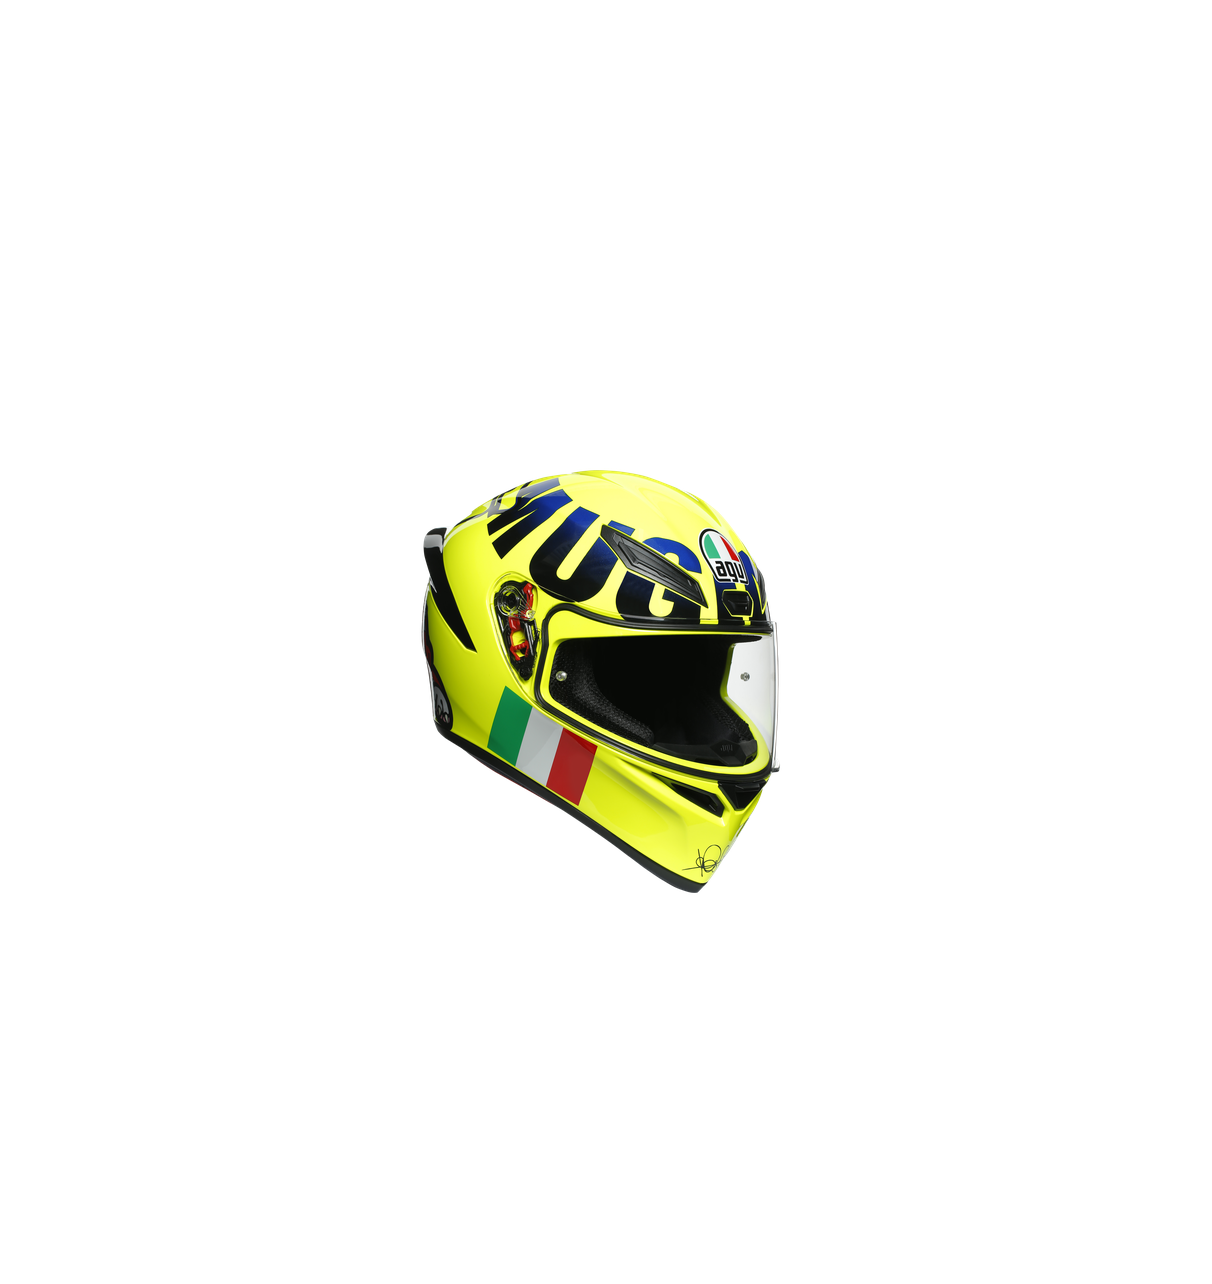 <span style="font-weight: bold;">Шлем AGV K-1 TOP - ROSSI MUGELLO 2016</span><br>